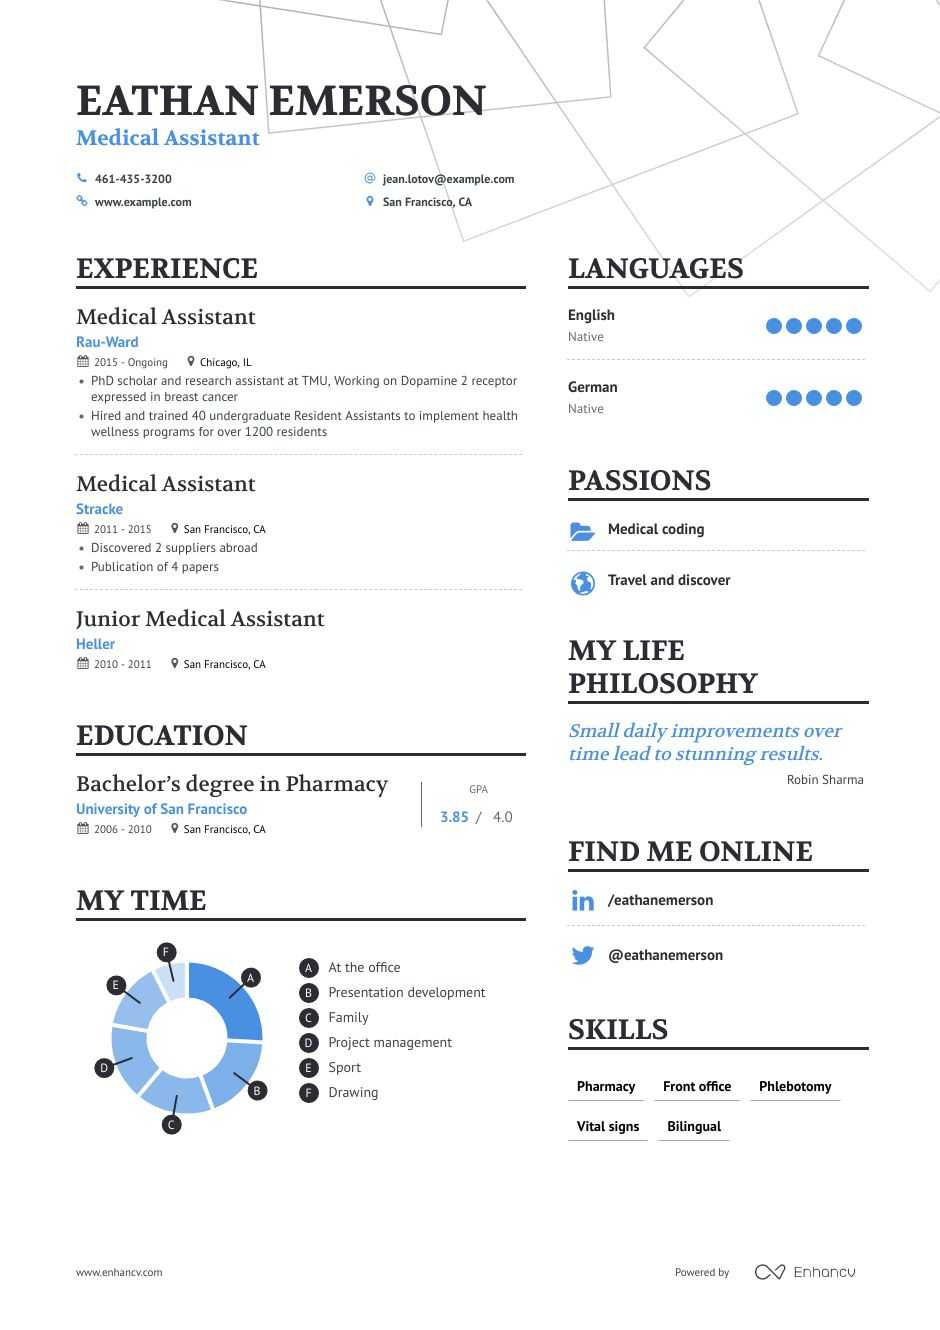 Free Samples Of Medical assistant Resumes top Medical assistant Resume Examples & Samples for 2021 Enhancv.com